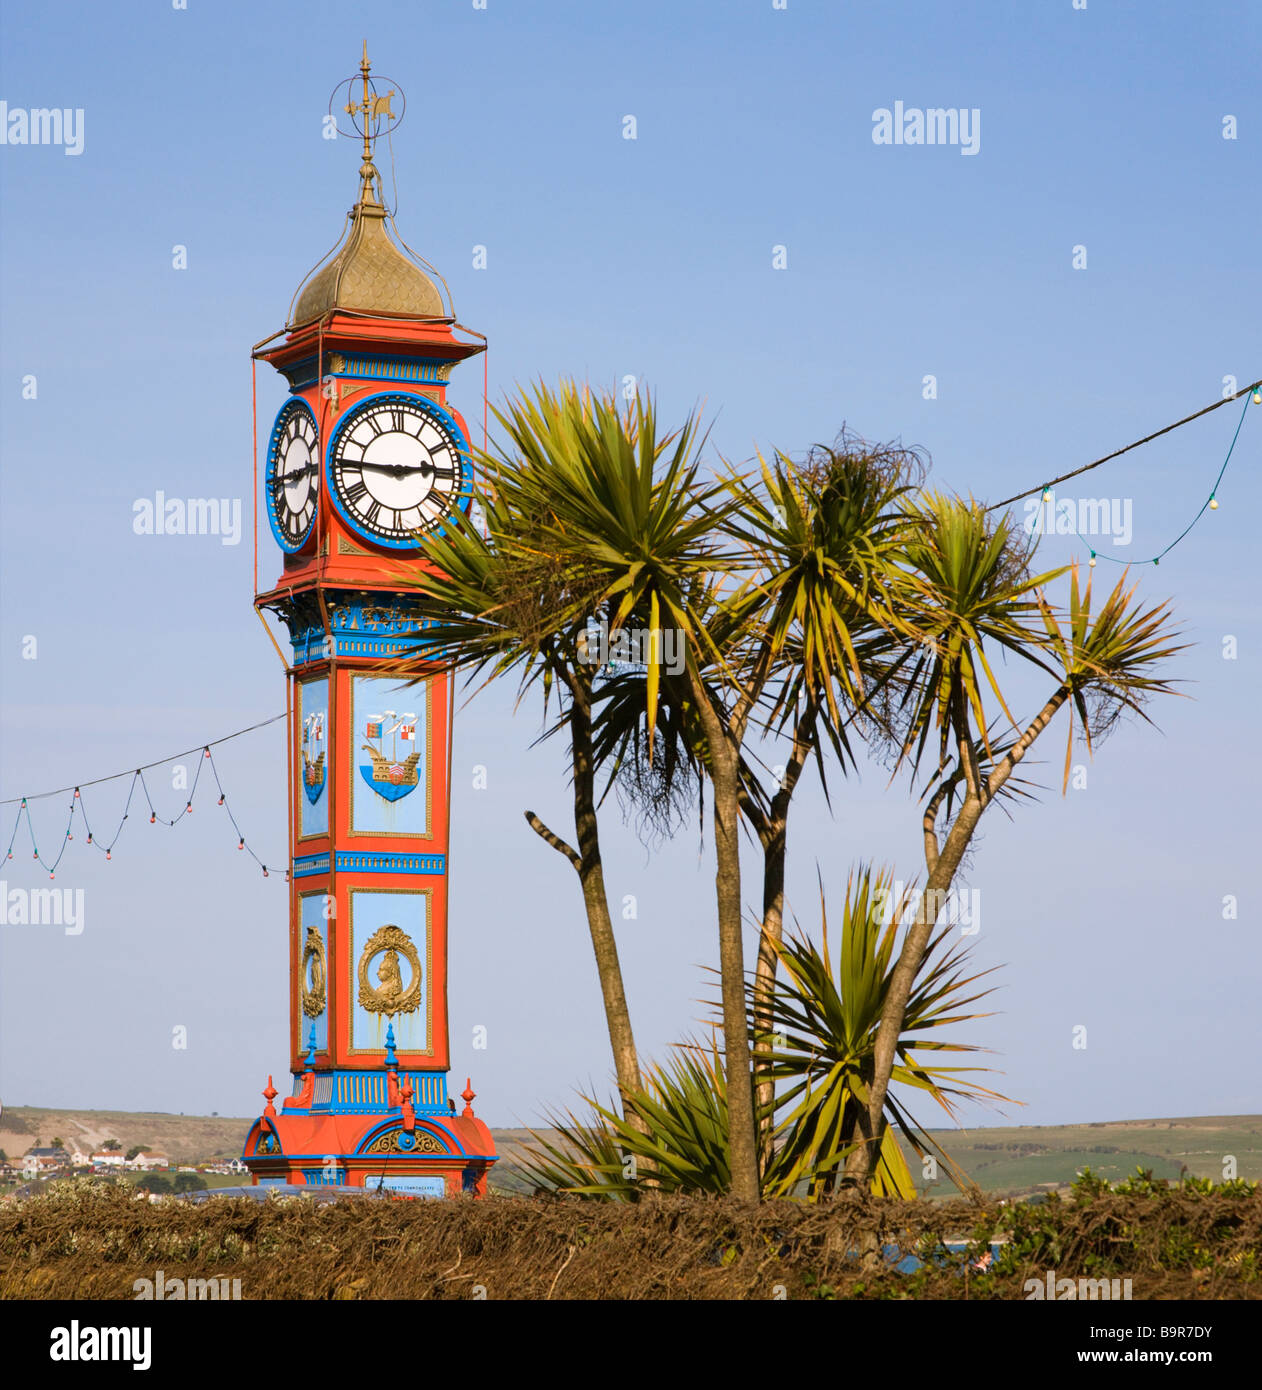 A view of the iconic Jubilee clock and trees long the seafront at Weymouth, Dorset. UK. Stock Photo